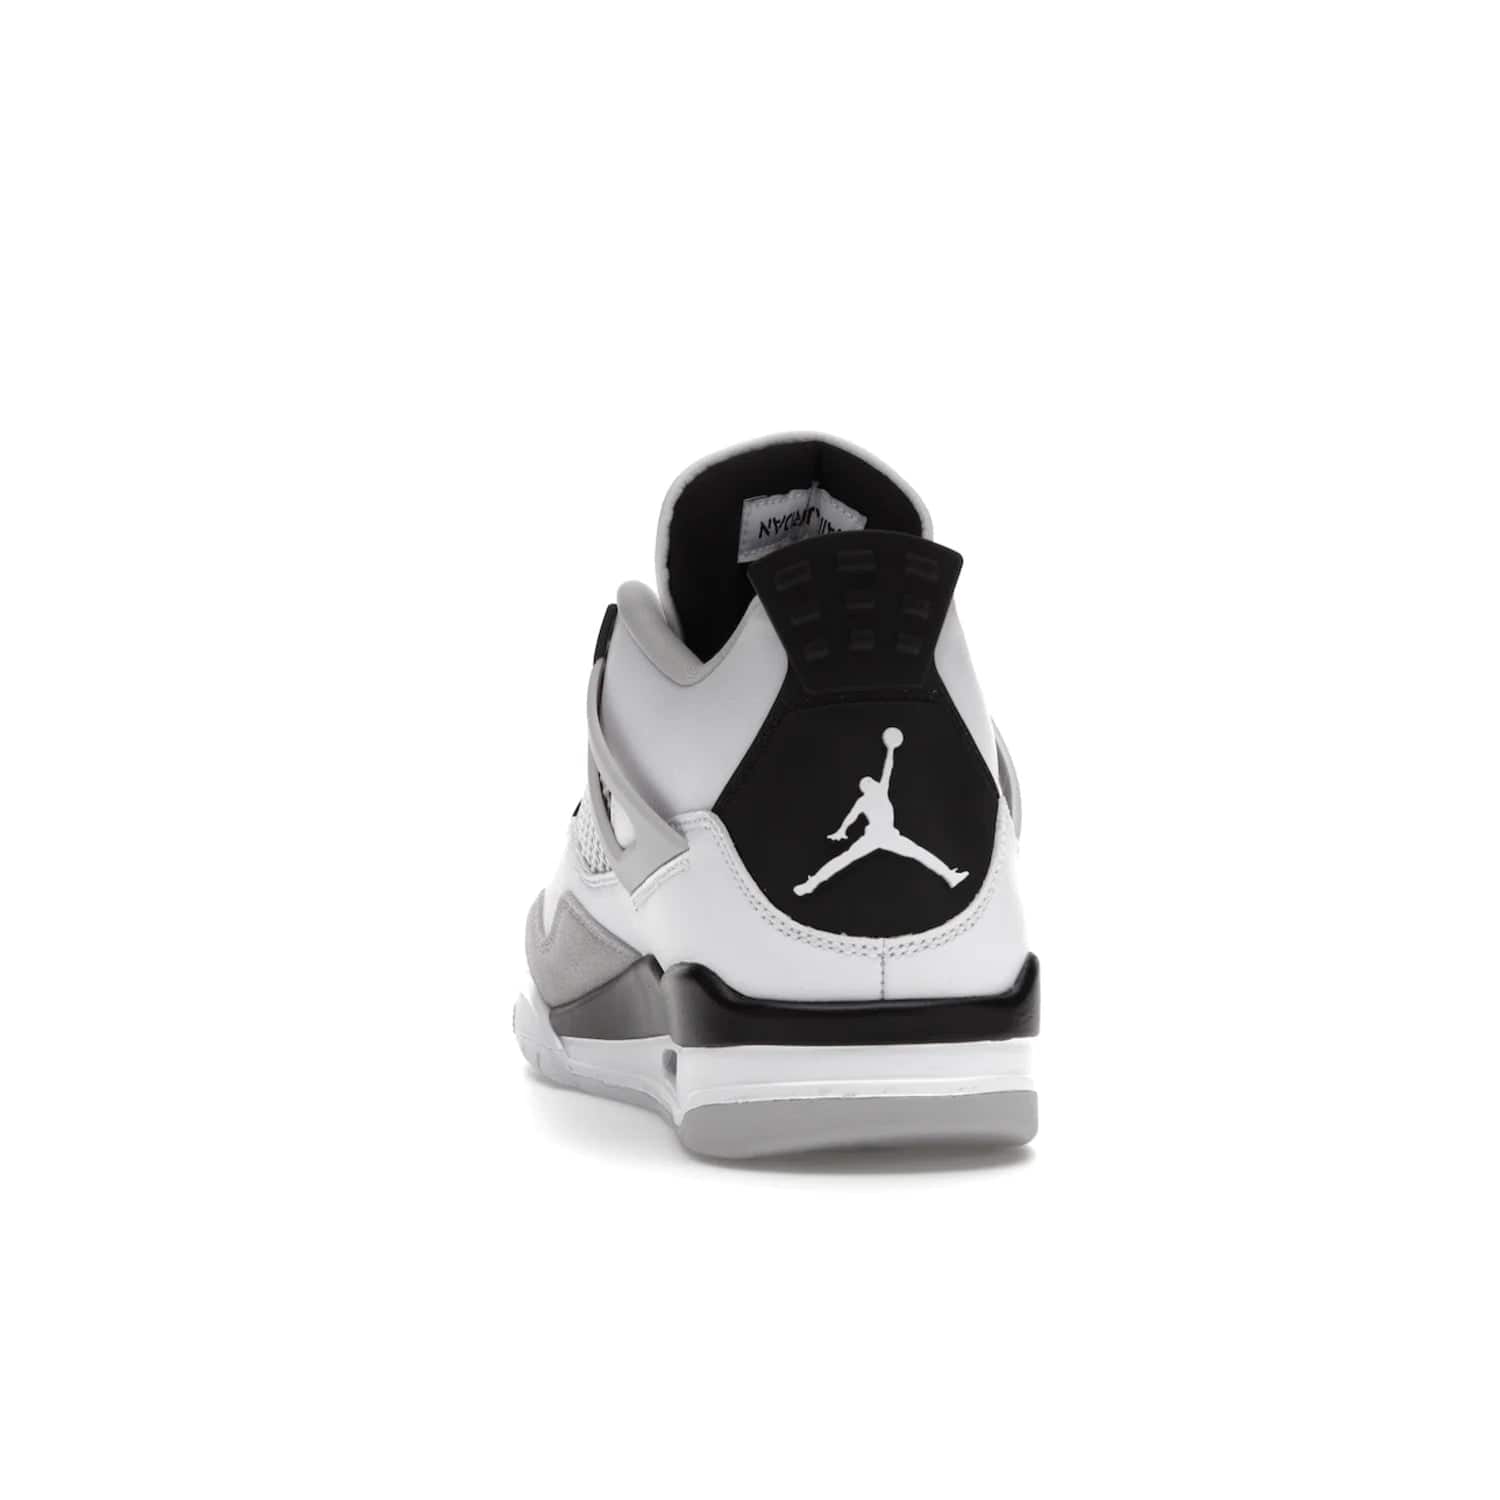 Jordan 4 Retro Military Black - Image 27 - Only at www.BallersClubKickz.com - Updated Air Jordan 4 style with a white/black/light grey sole and visible Air unit. Released in May 2022, offering timeless classic style and comfort.